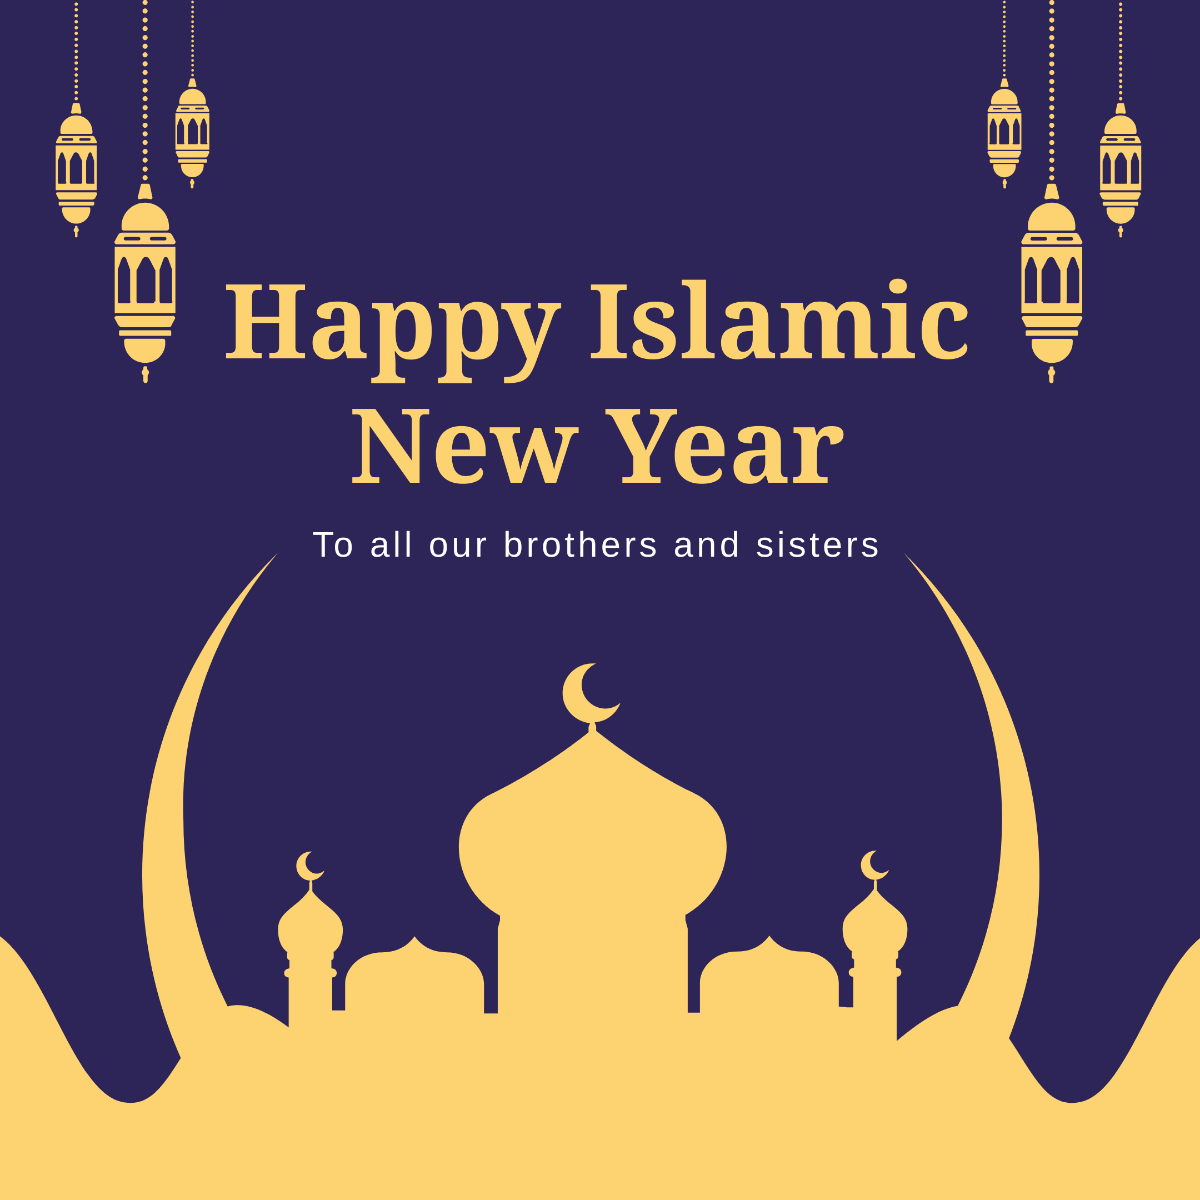 Islamic New Year Instagram Post Template